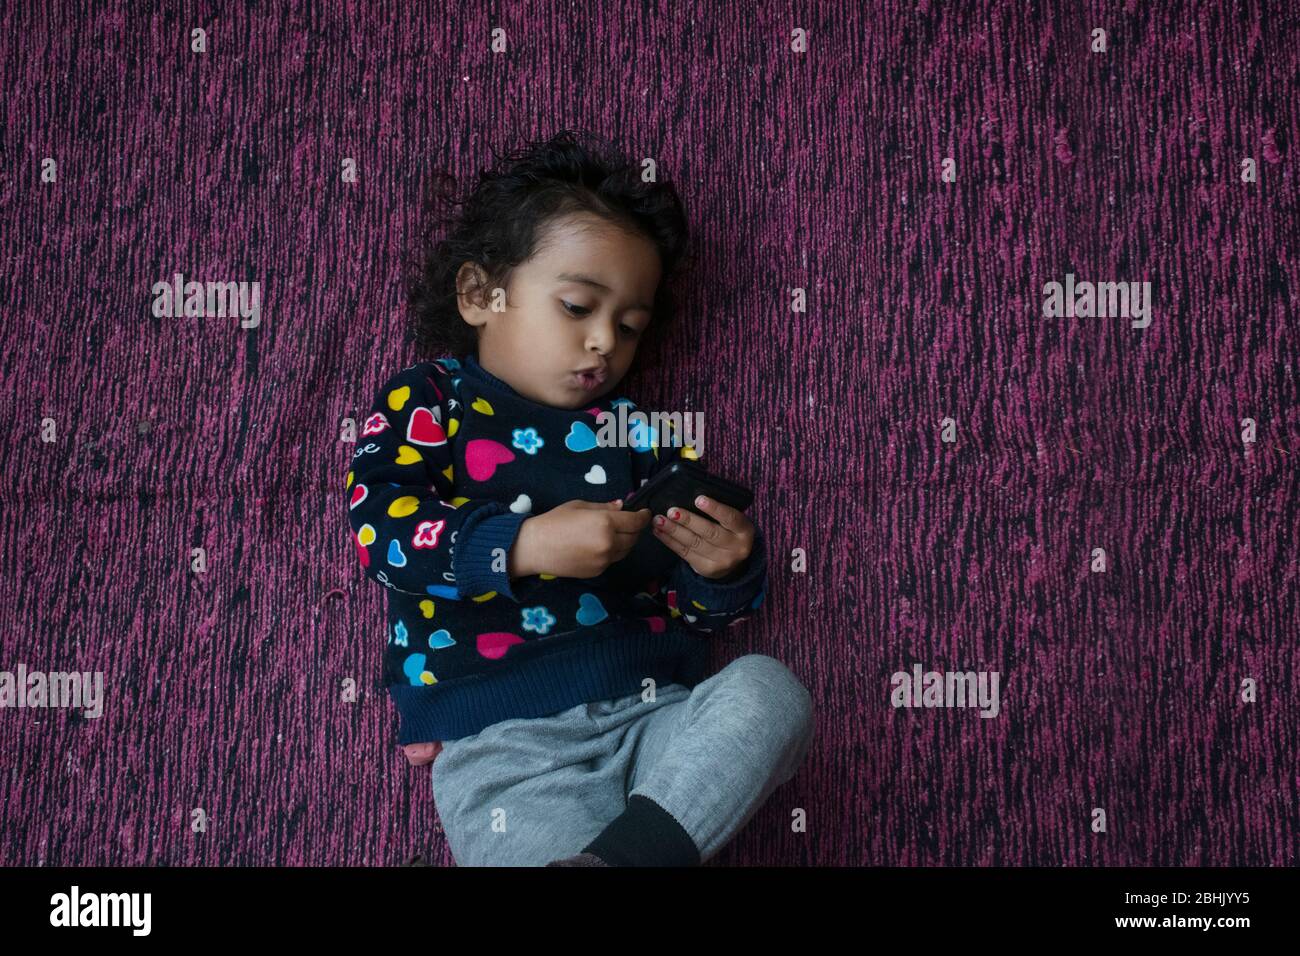 child using a mobile phone Stock Photo